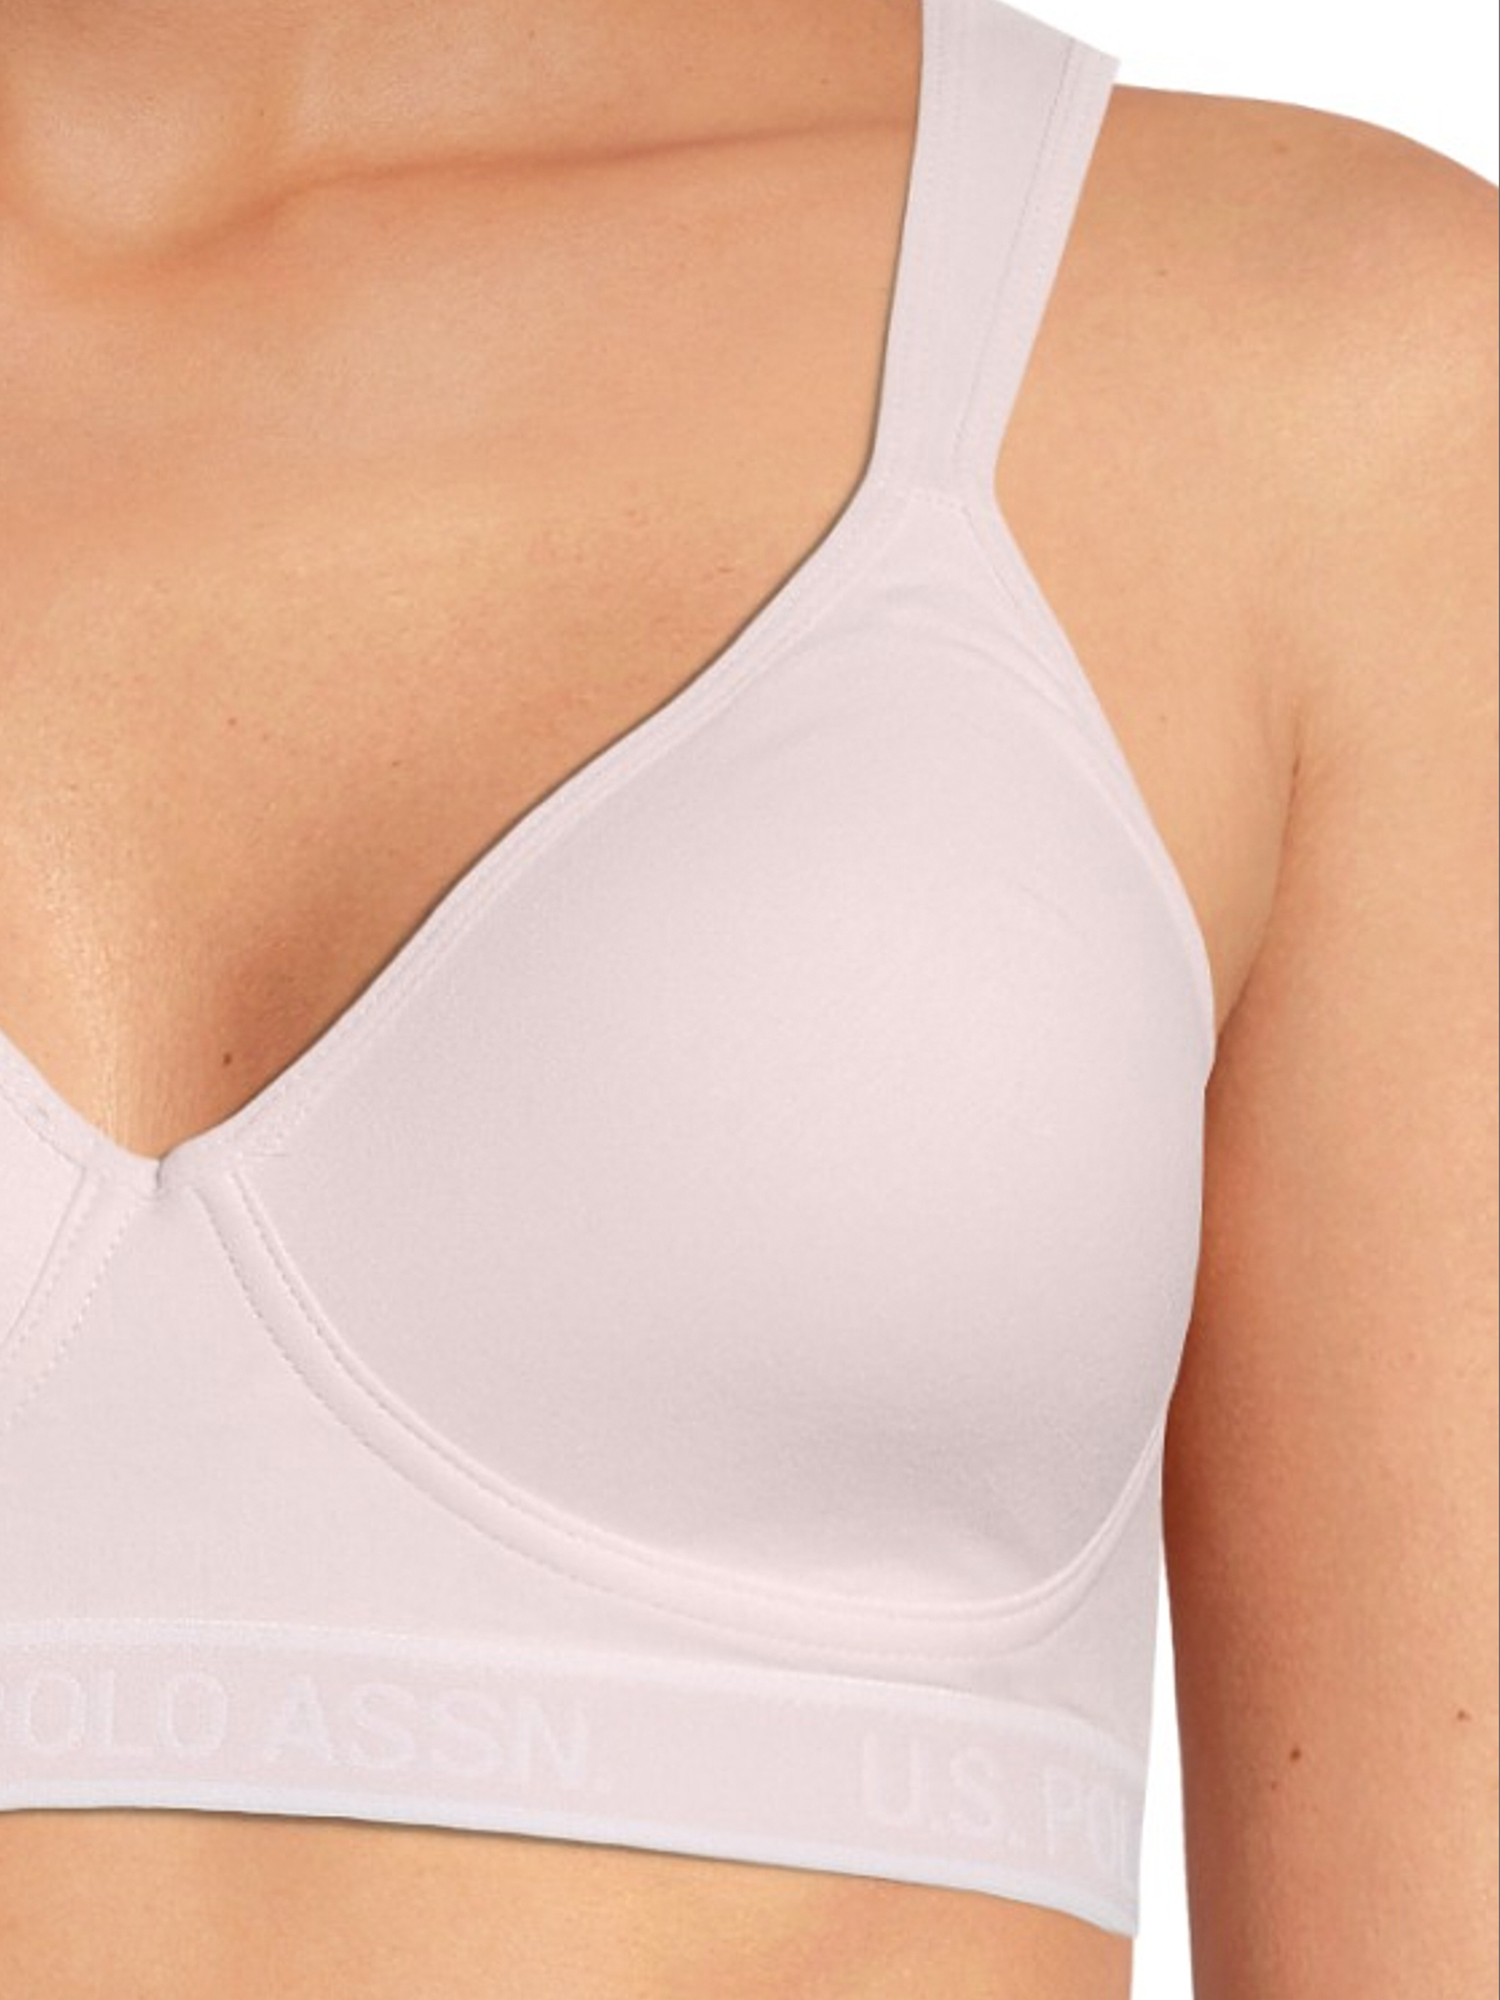 U.S. Polo Assn. Women's Tag-Free Striped Sports Bra Set, 3-Pack - image 2 of 4